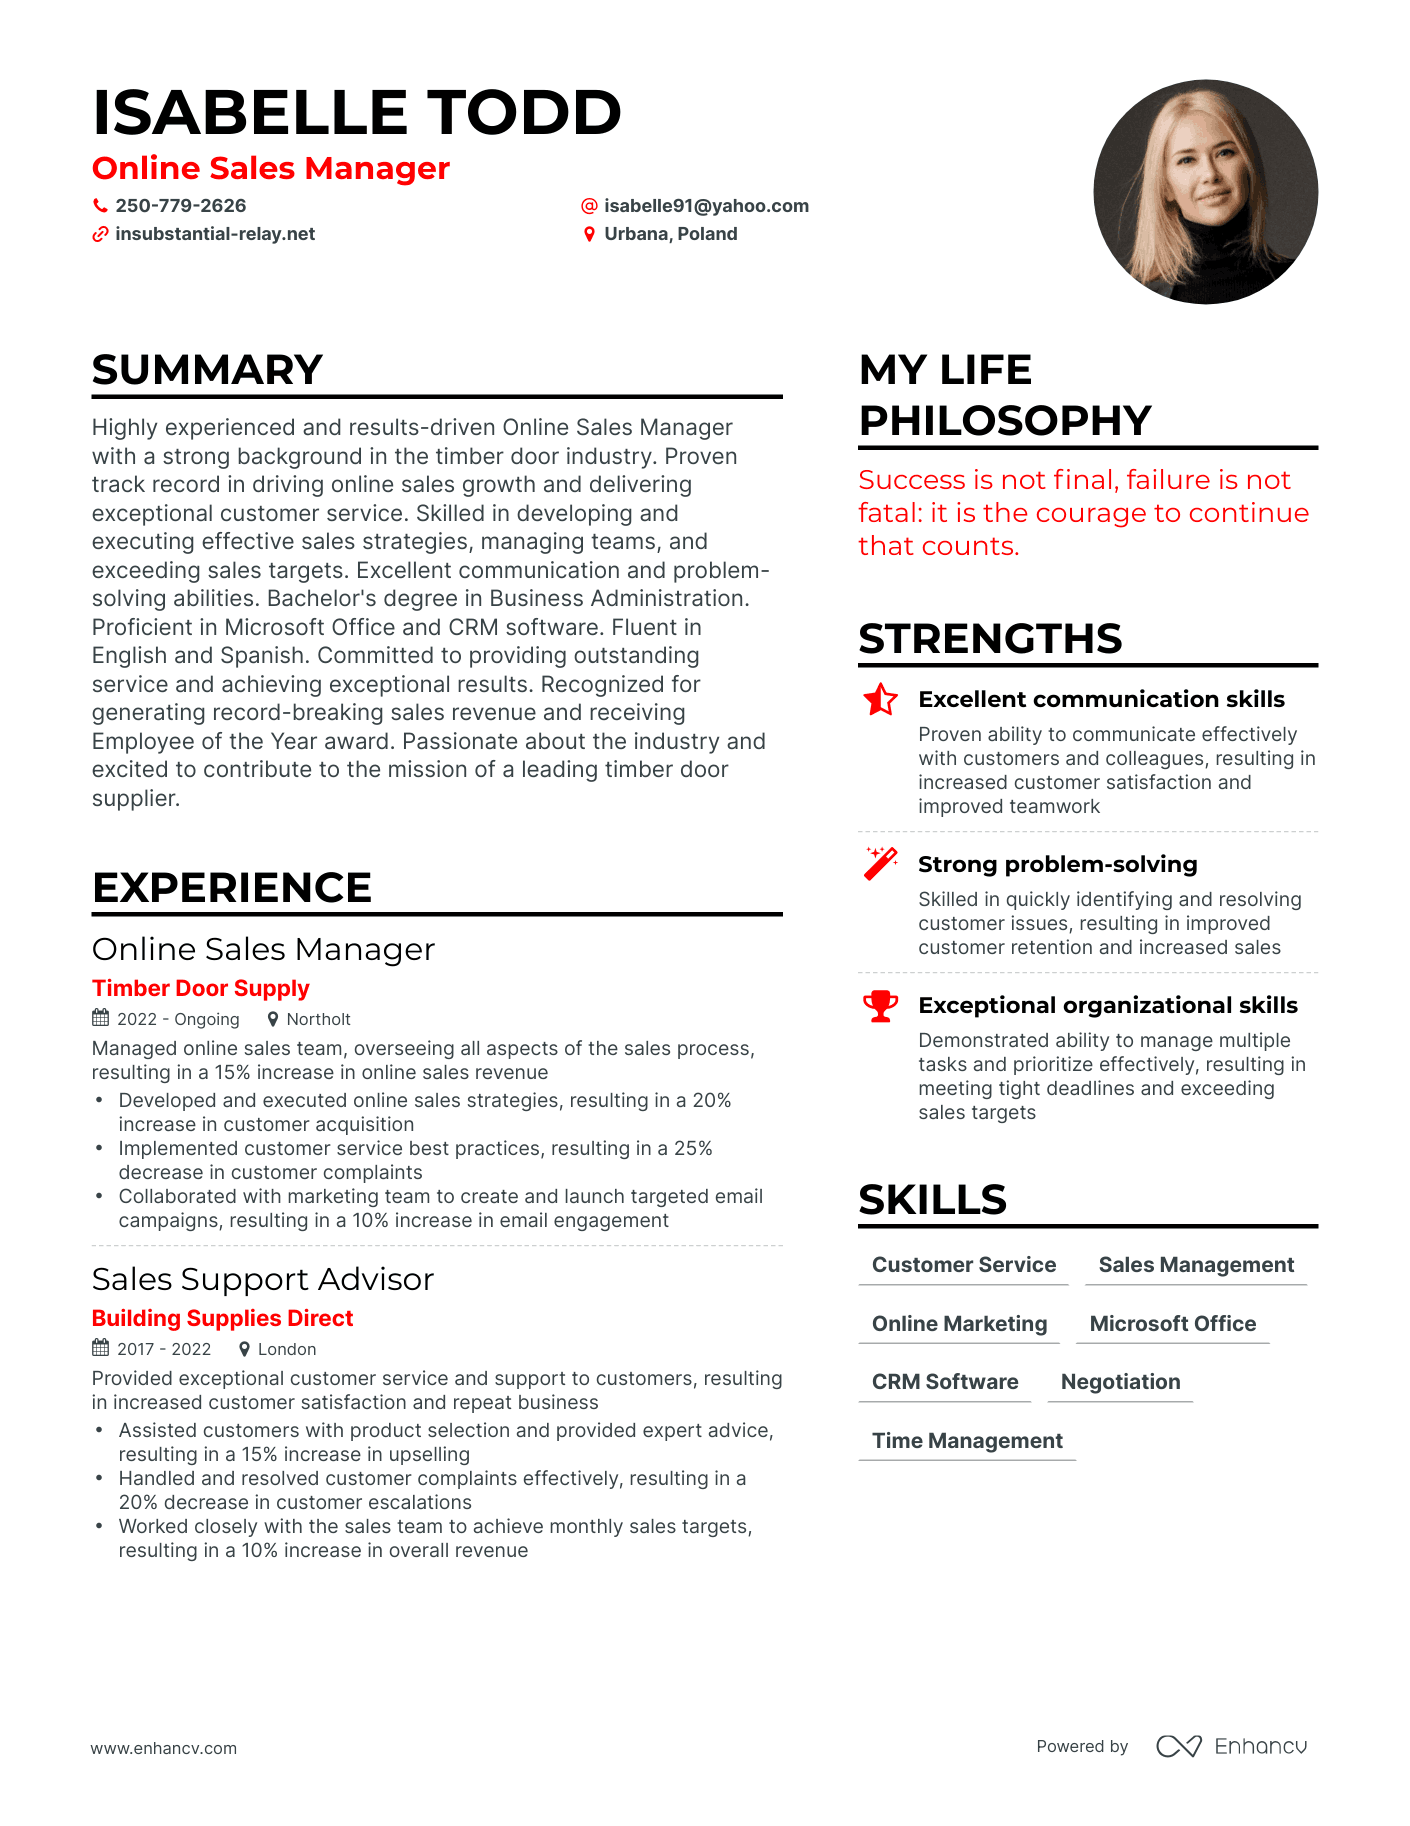 Online Sales Manager resume example